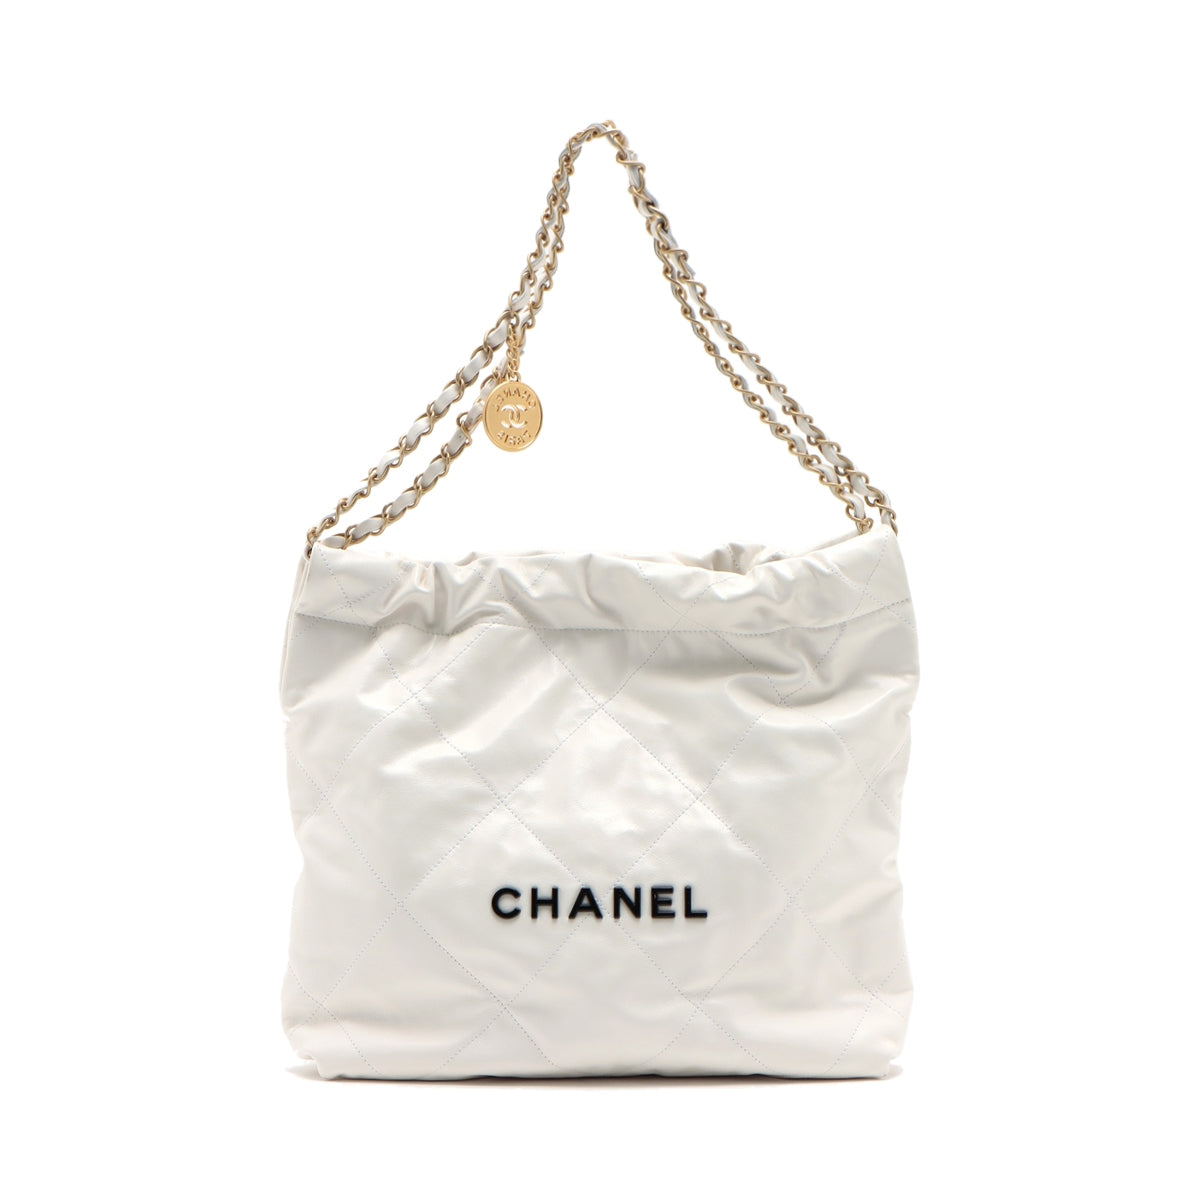 Chanel Chanel 22 small Calfskin 2way shoulder bag White Gold Metal fittings There is an IC chip